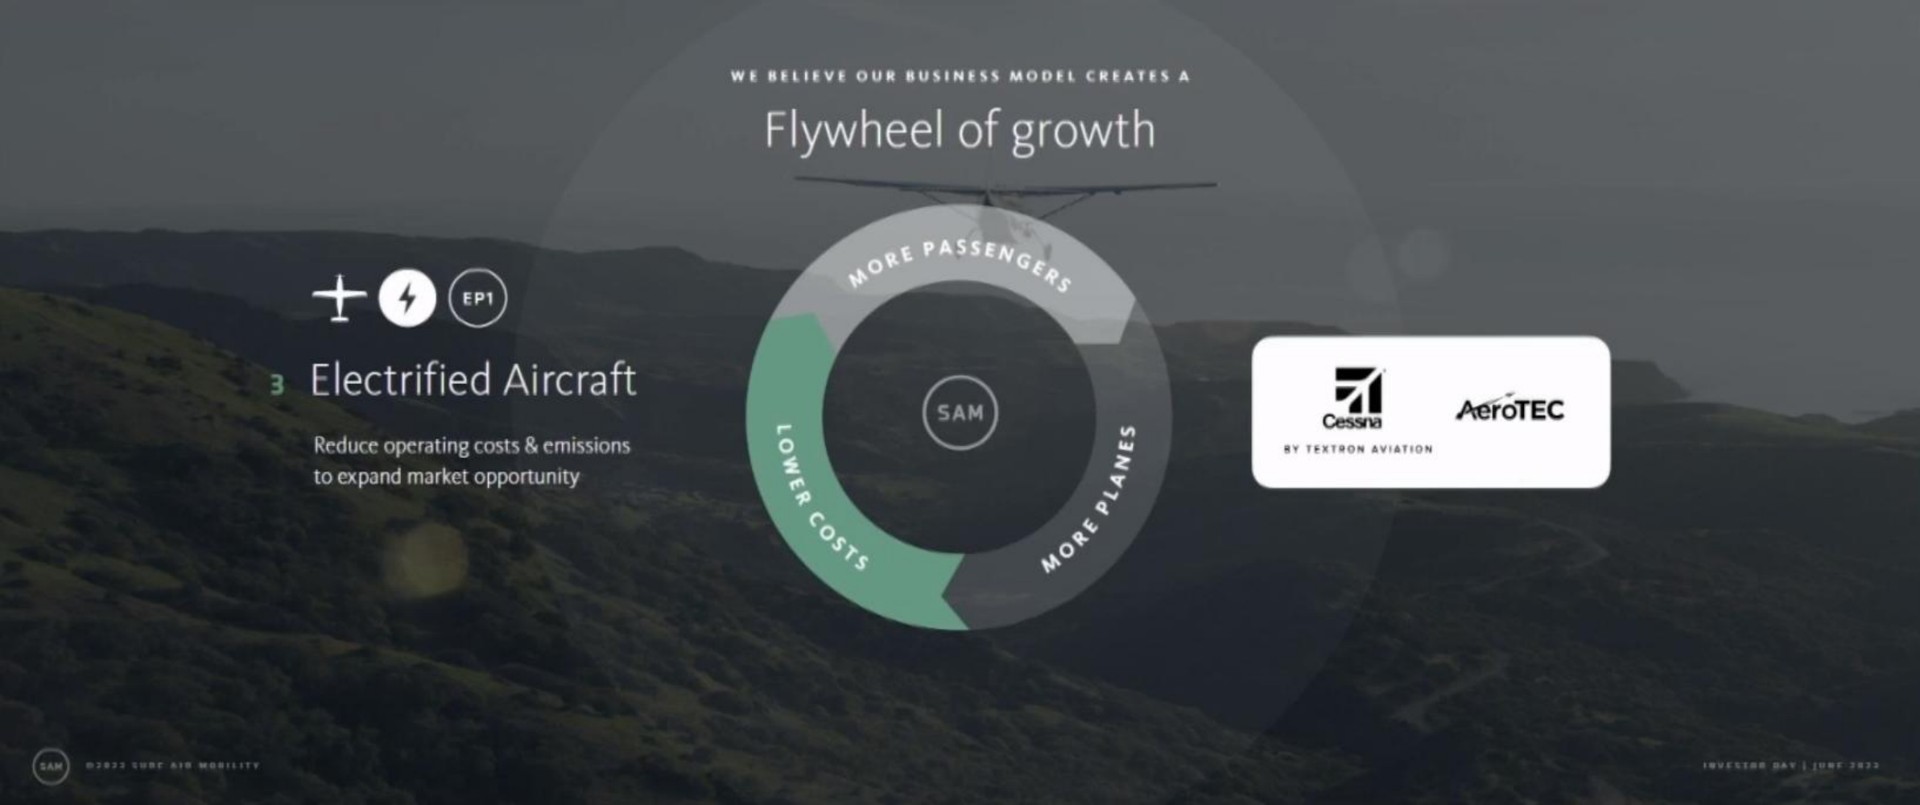 see i flywheel of growth electrified aircraft reduce operating costs emissions to expand market opportunity | Surf Air